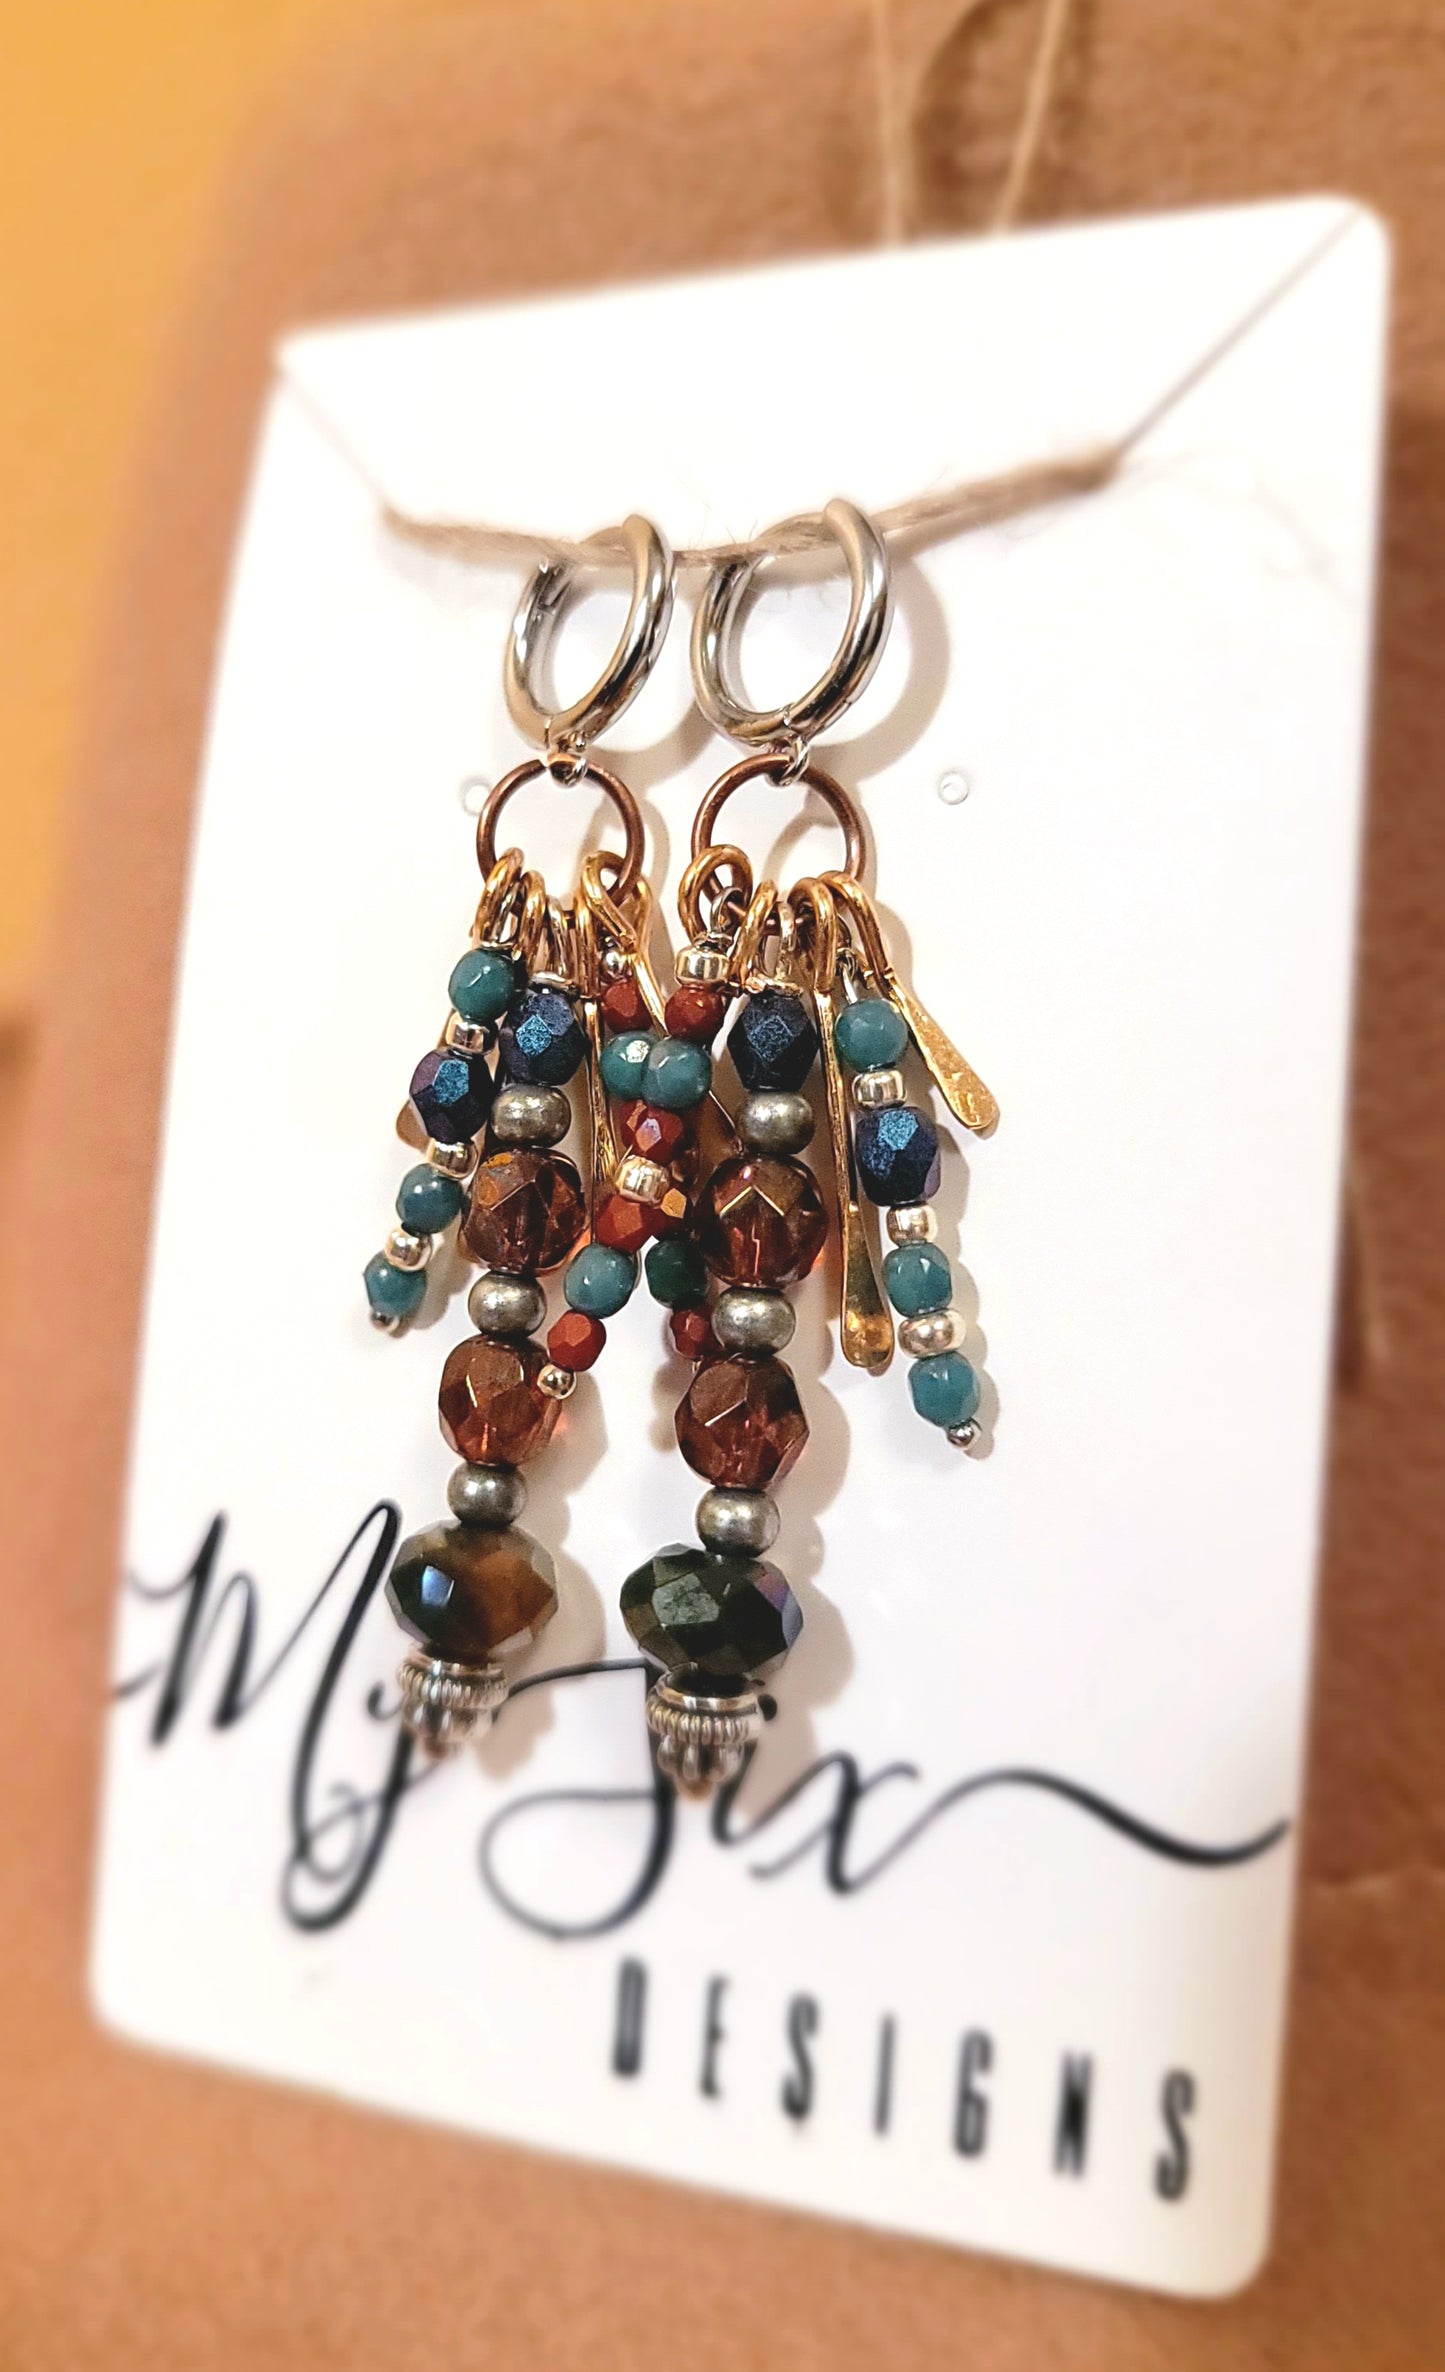 Earrings - Silver Hoop Clasps with Gemstones and assorted Metals